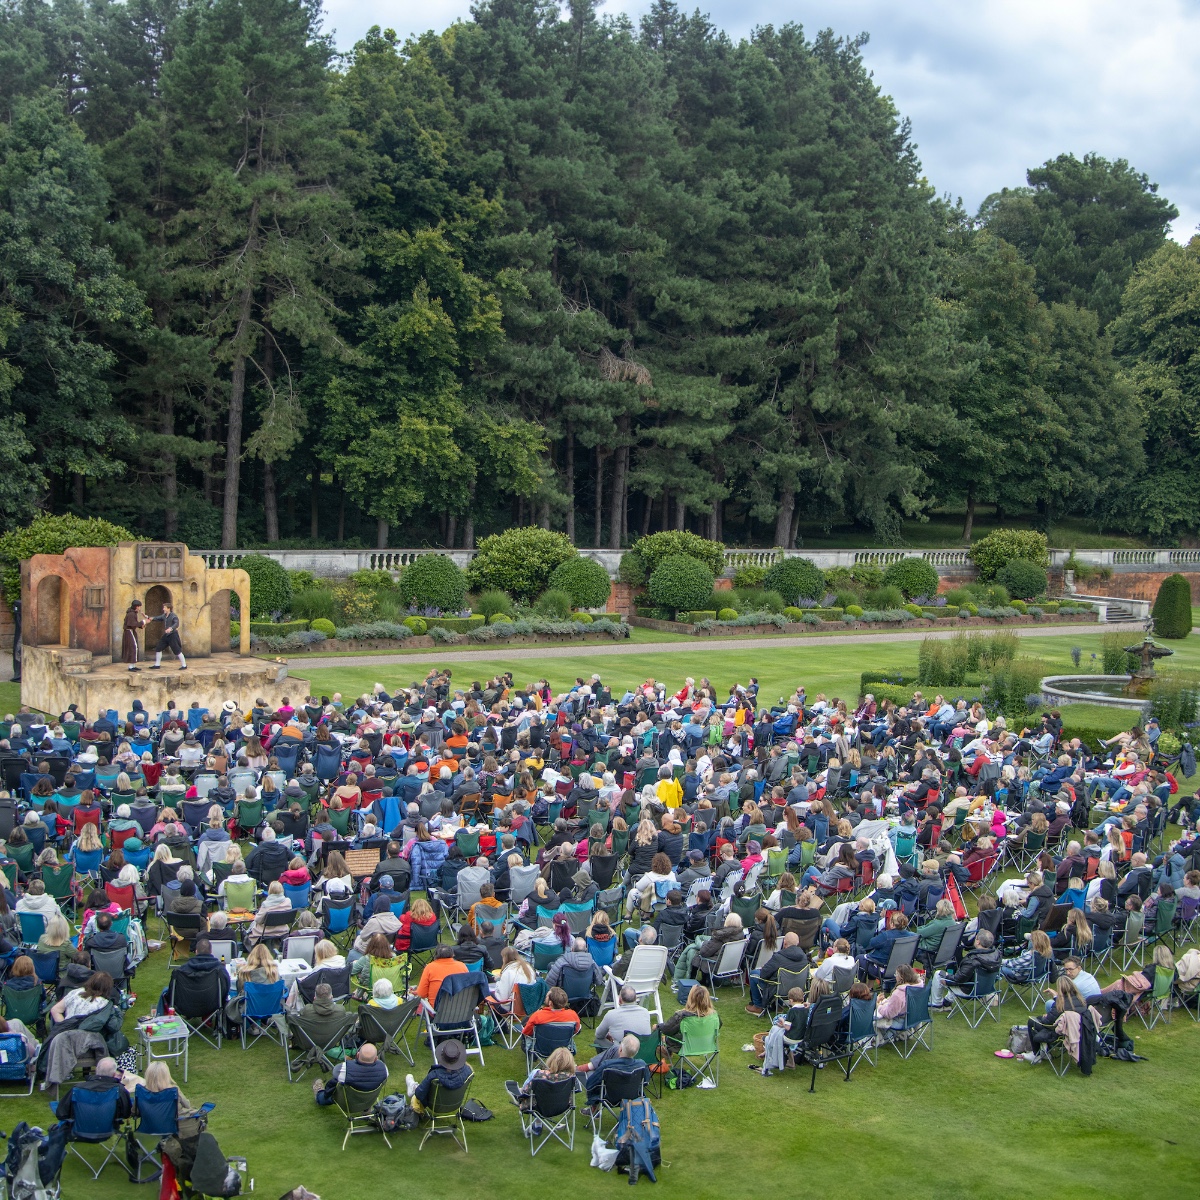 It's been one week since we welcomed 650 visitors to our beautiful gardens for a memorable picnic and to watch an incredible performance of Romeo & Juliet by @TLCMuk  We hope that everyone had a delightful evening! 🎭 #outdoortheatre #shakespeare #romeoandjuliet #knowsleyhall